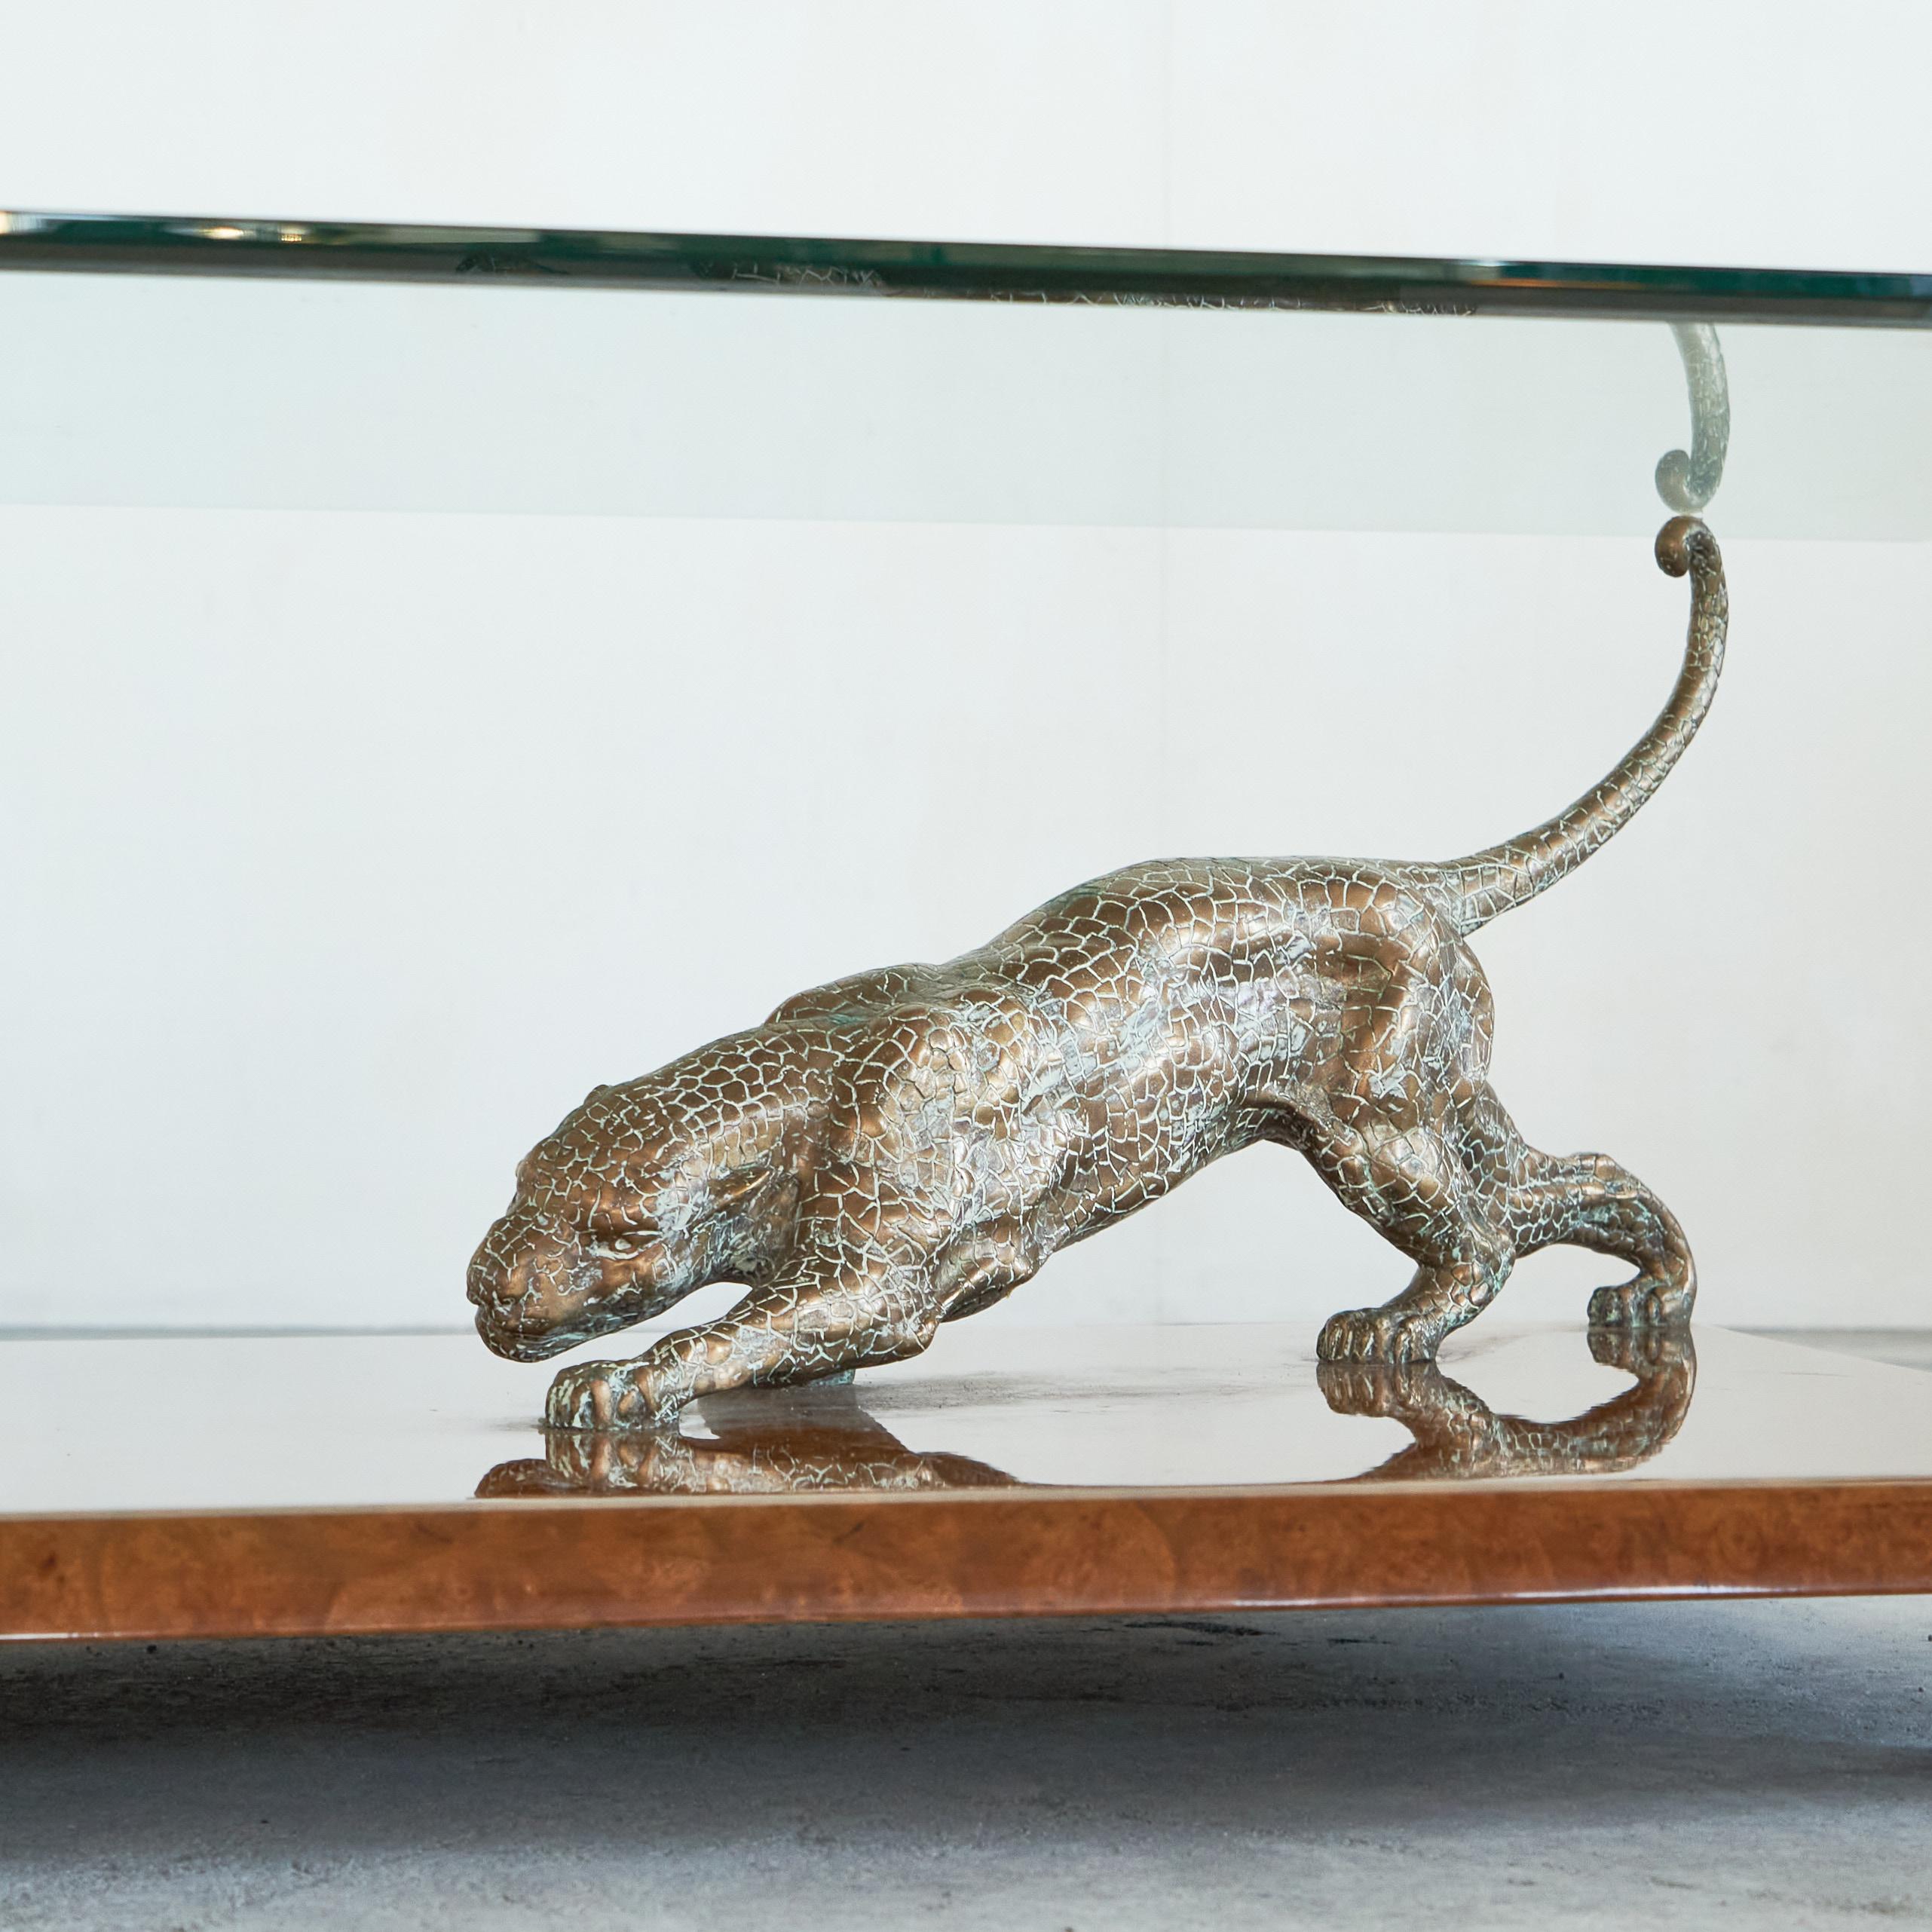 Nicola Voci 'Jaguar' Coffee Table in Bronze, Burl Wood and Beveled Glass 1970s For Sale 4